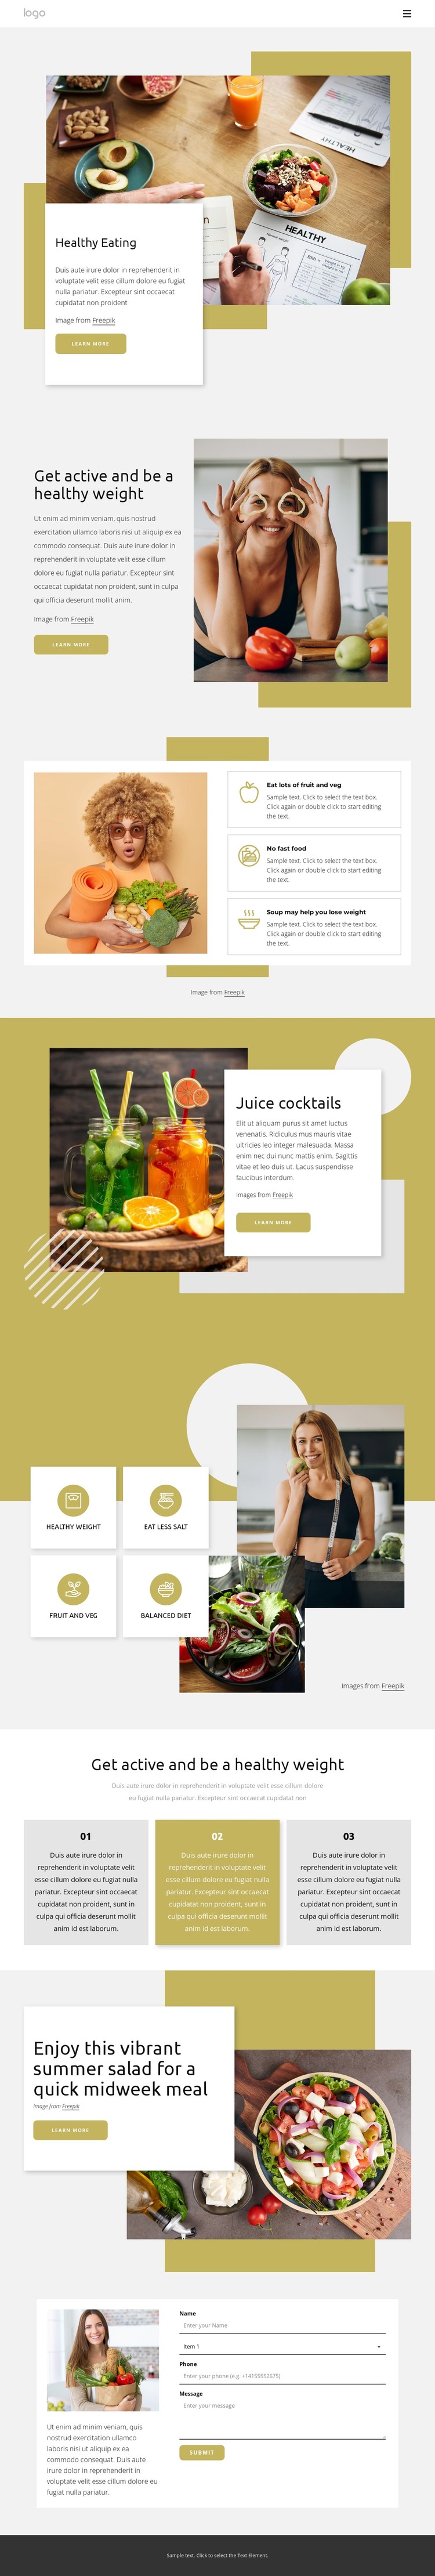 Focus on healthy eating CSS Template